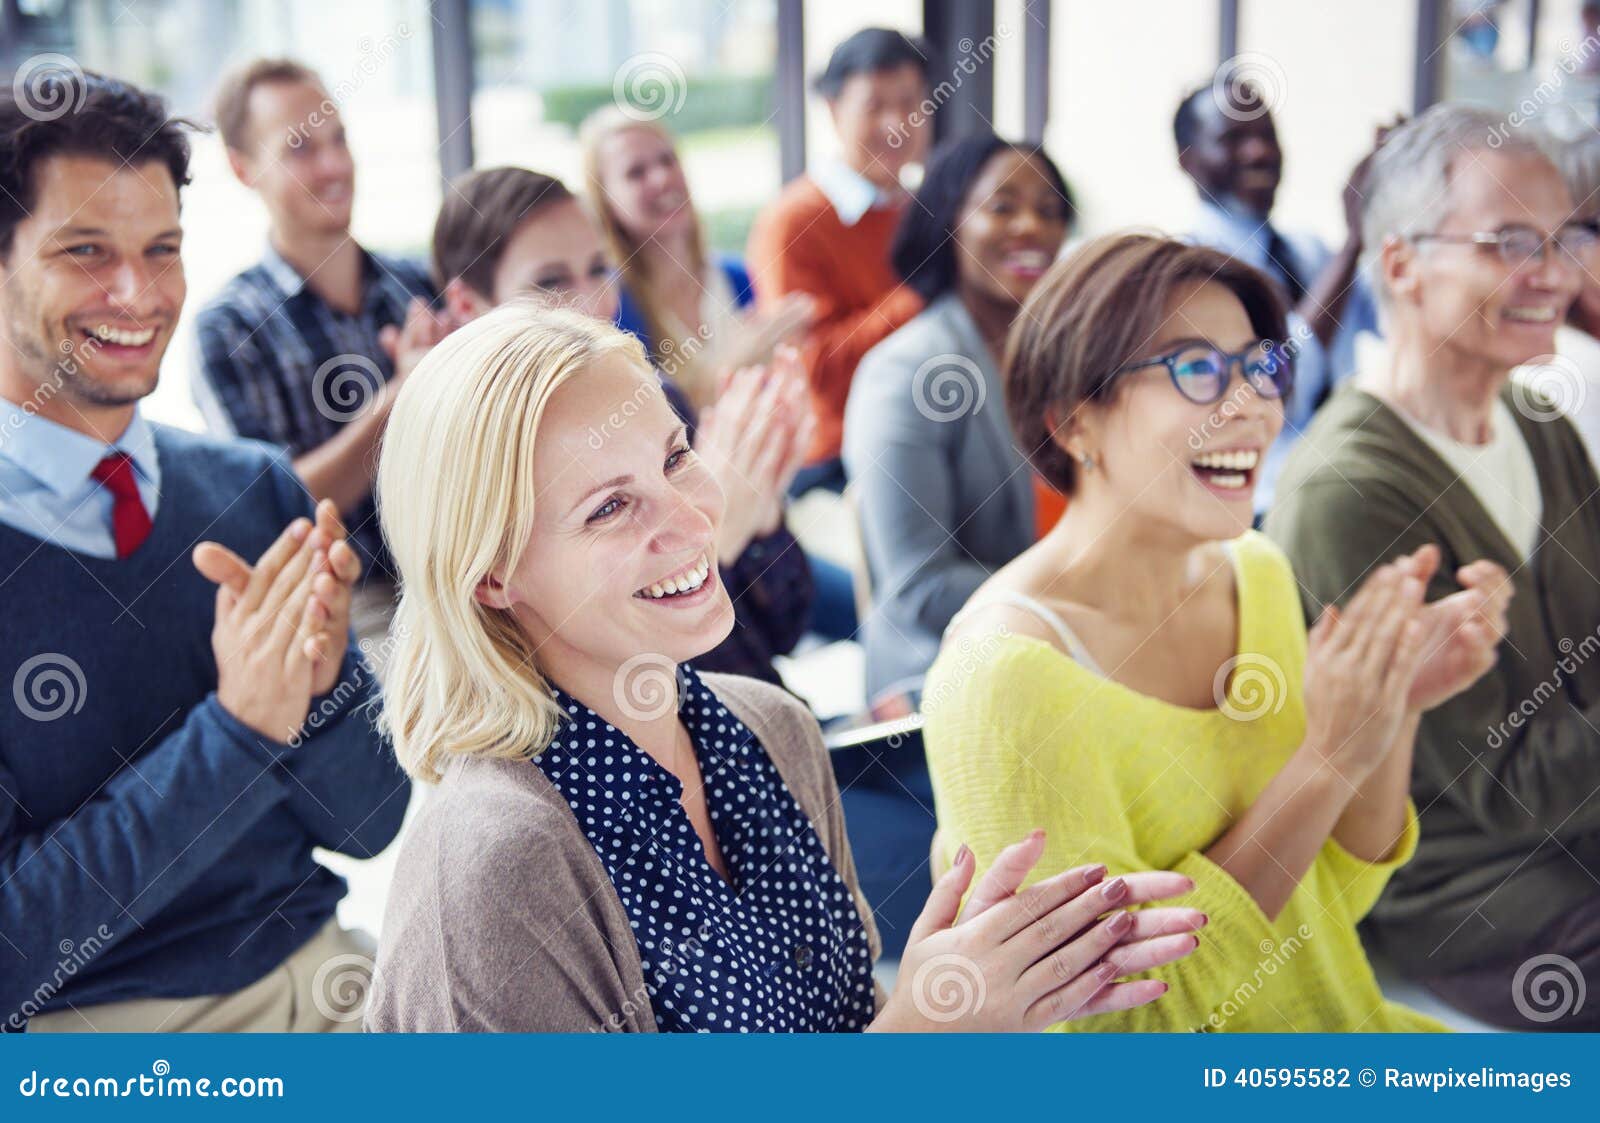 group of multiethnic cheerful people applauding